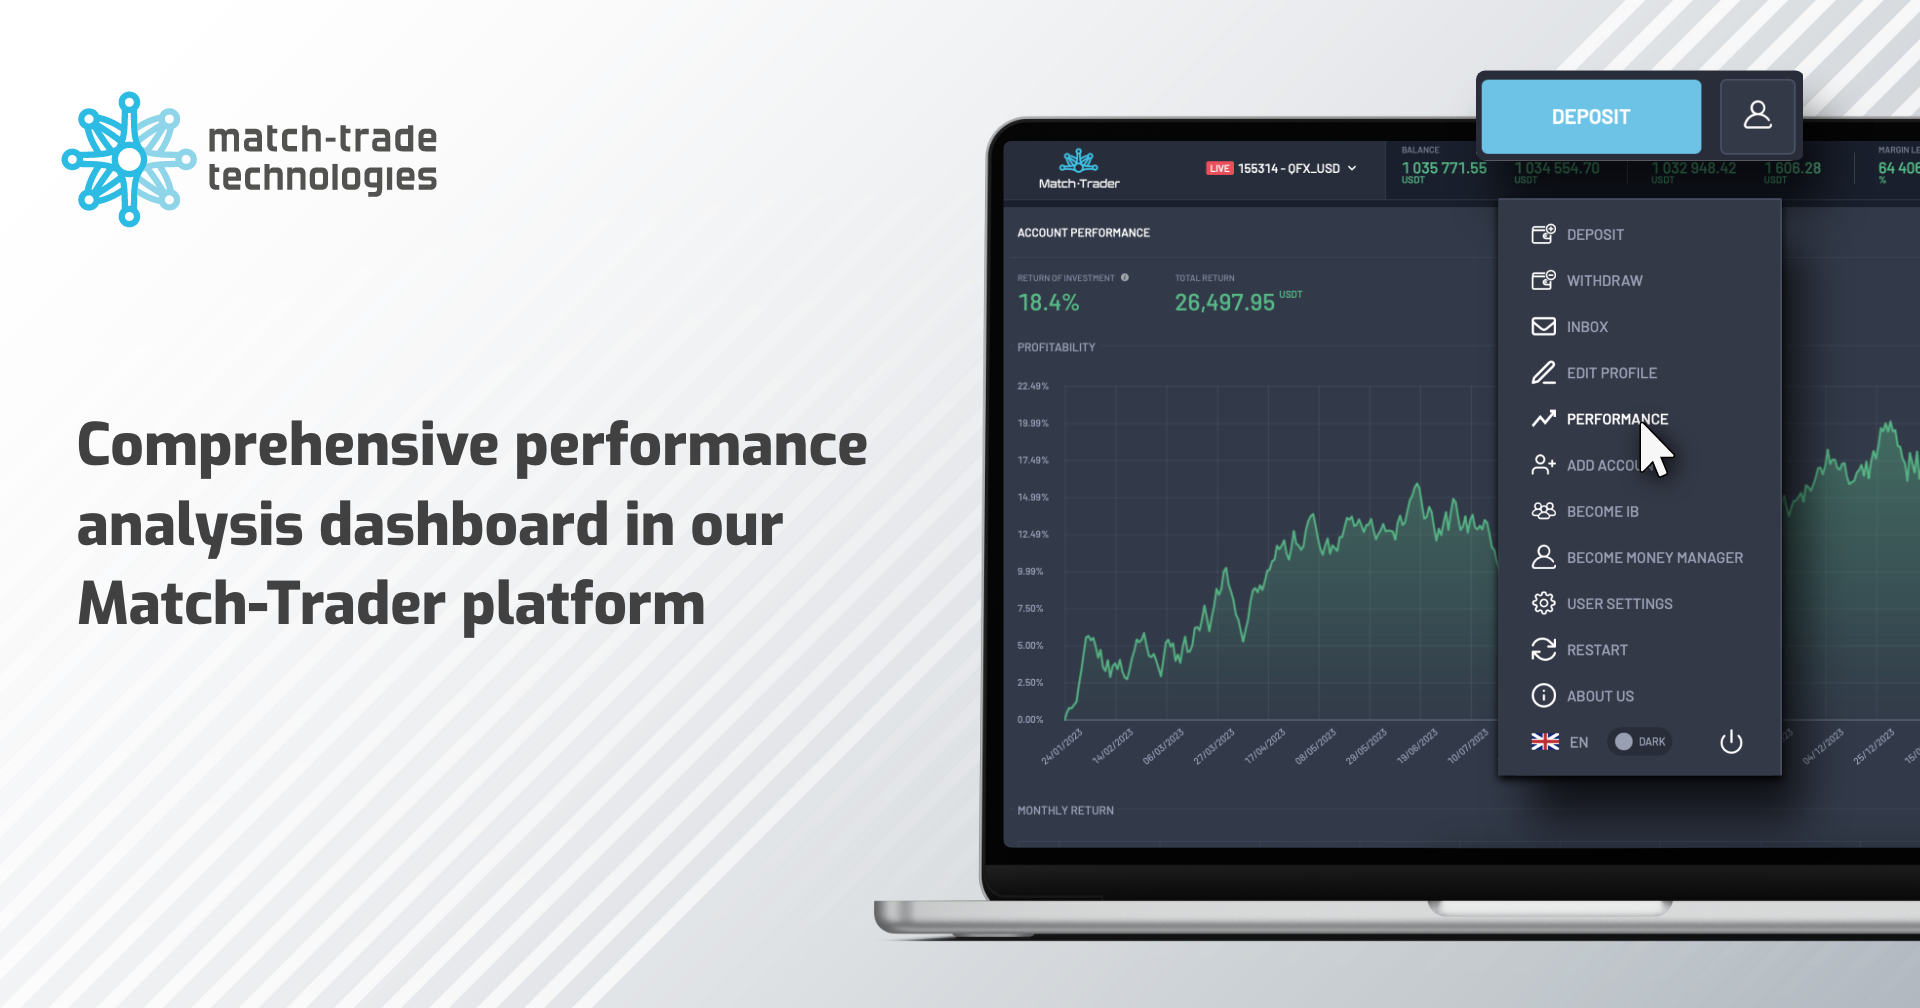 Match-Trade January release: Comprehensive performance analysis dashboard in our Match-Trader platform